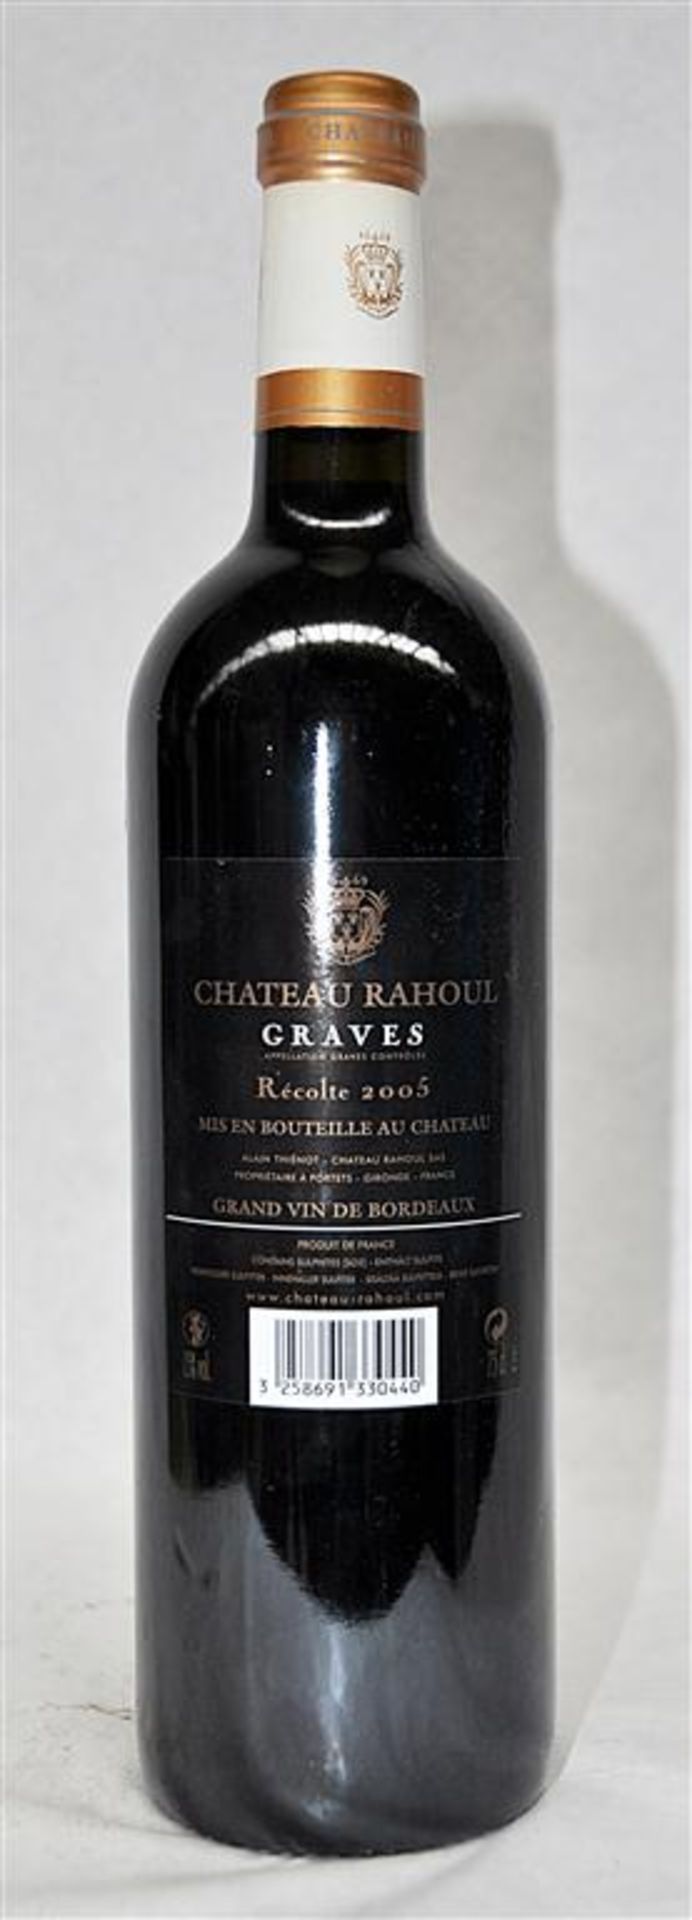 1 x Chateau Rahoul Graves Recolte Red Wine - French Wine - Year 2005 - Bottle Size 75cl - Volume 13% - Image 3 of 3